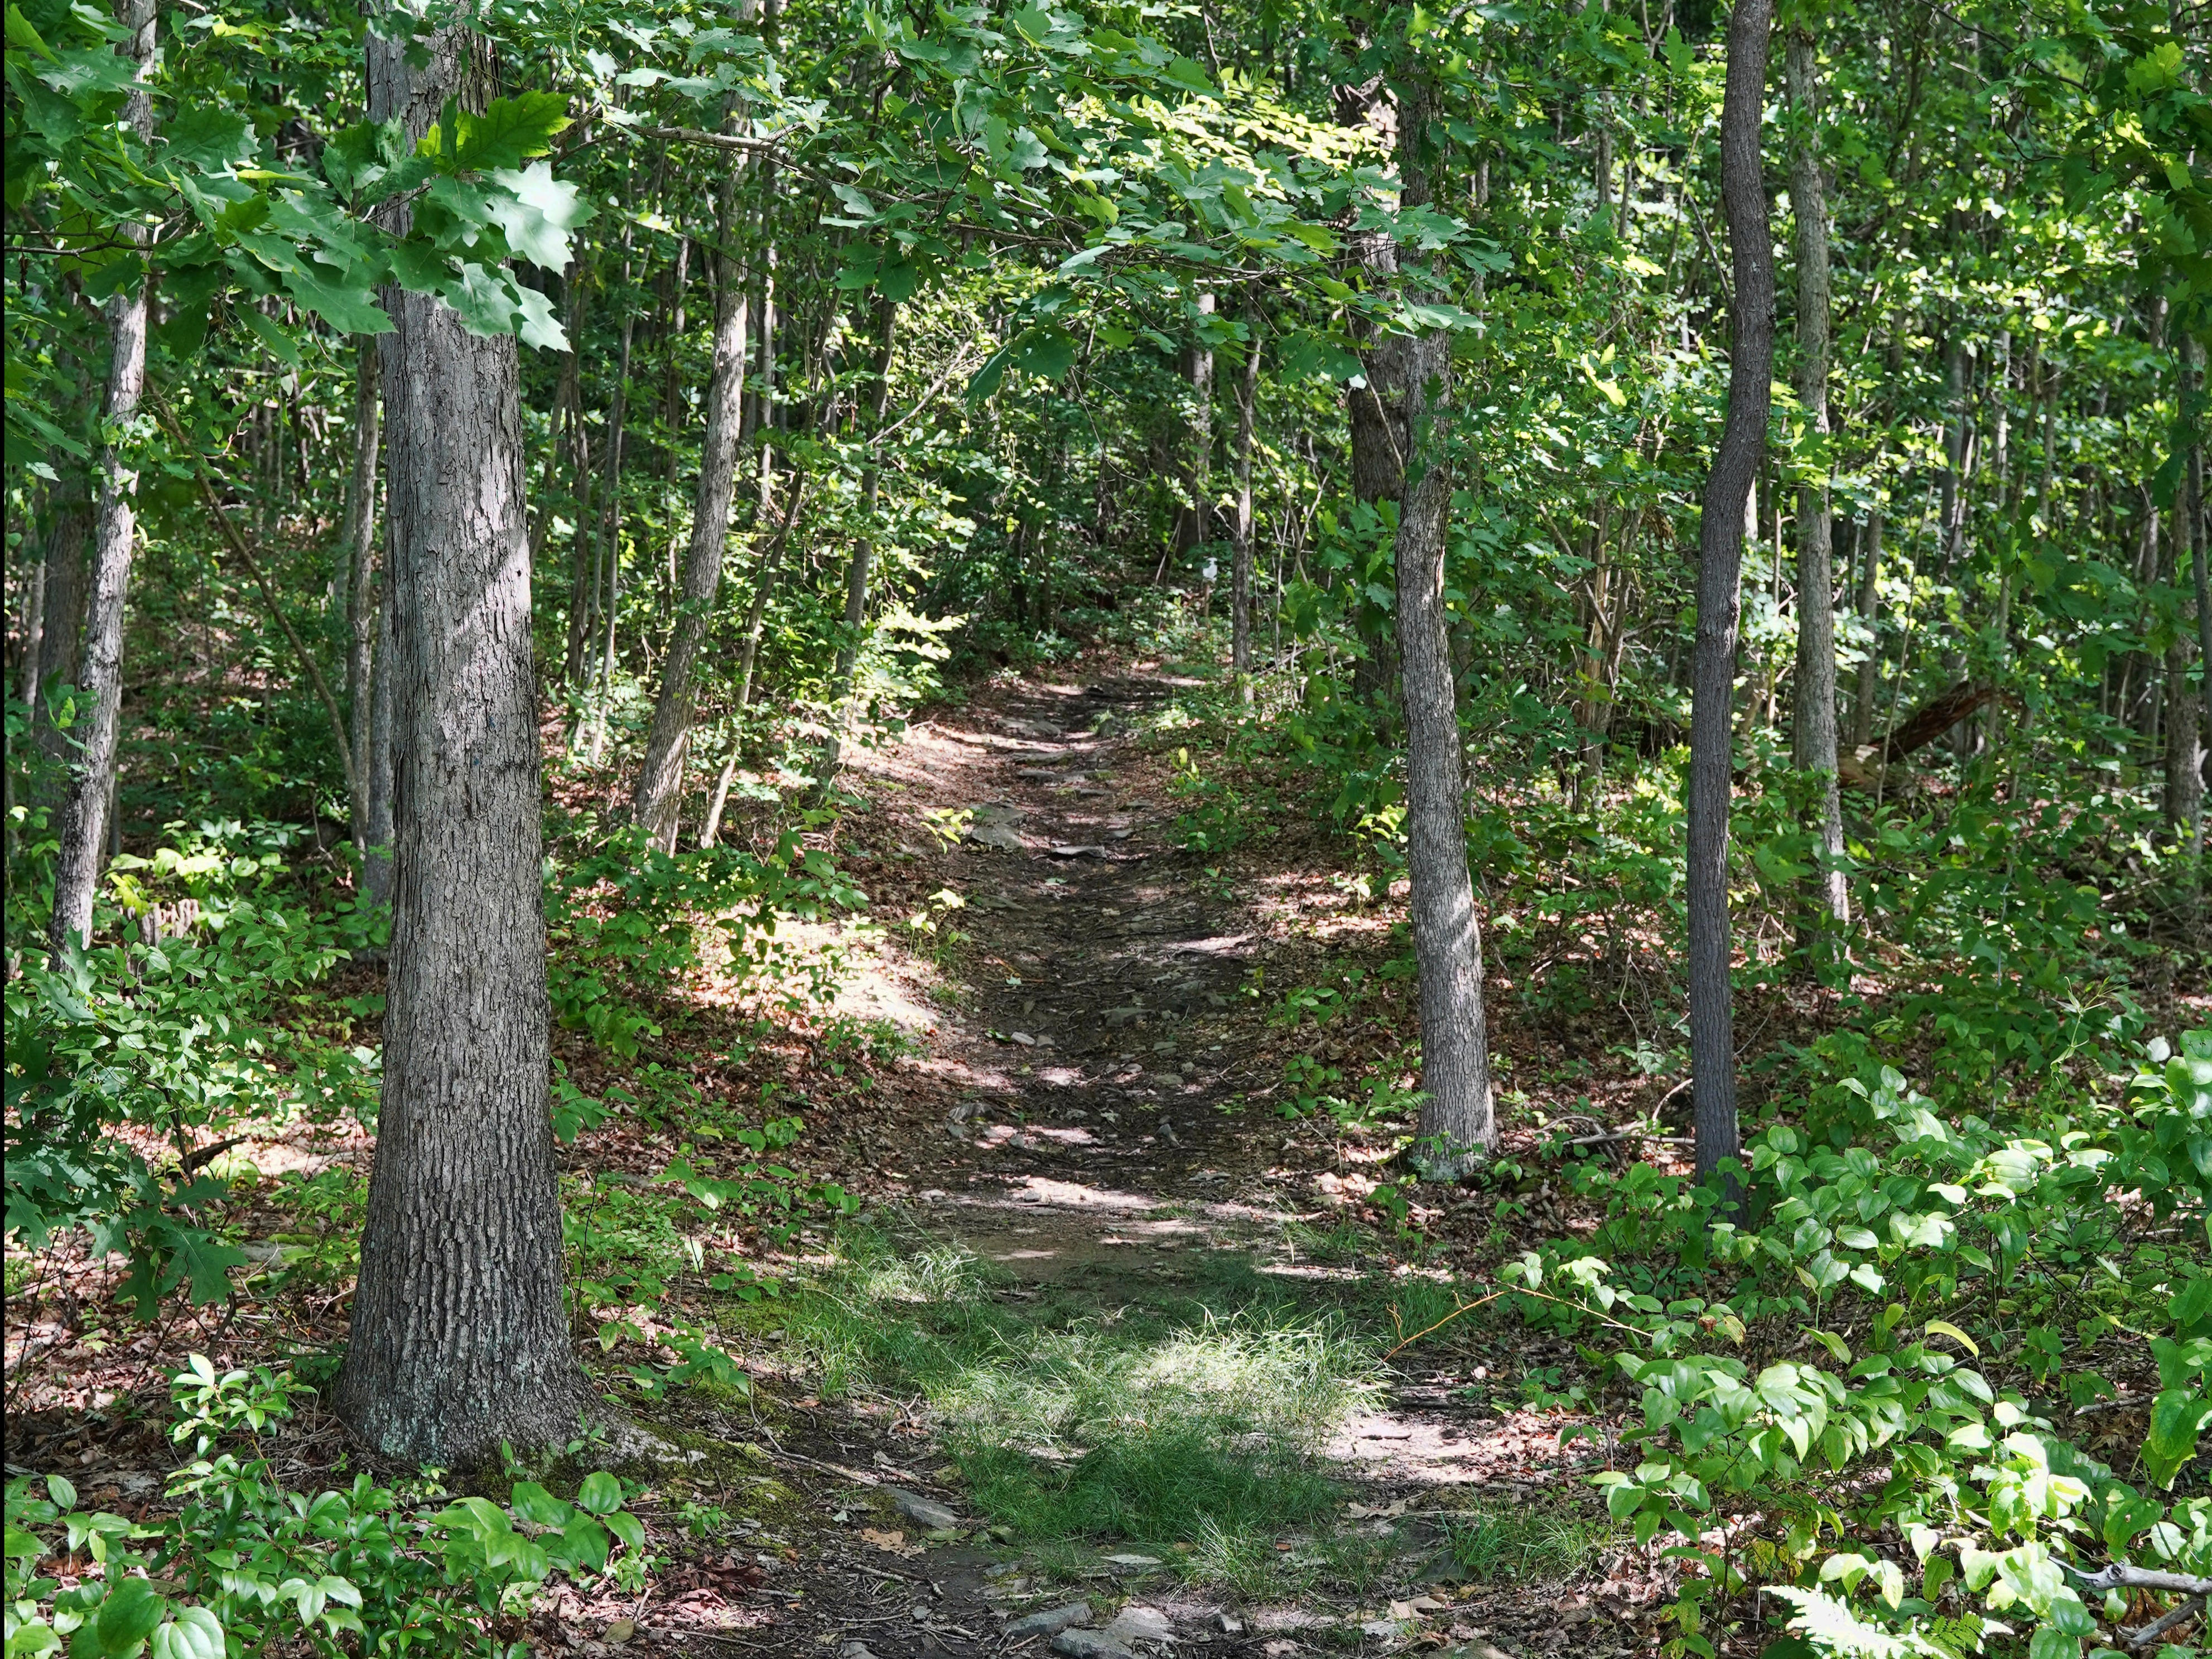 <p>If you're looking for a multi-day, beginner-friendly hike, then this one in southwestern Pennsylvania is a perfect choice.</p><p>The <a href="https://www.laurelhighlands.org/listing/laurel-highlands-hiking-trail/565/">70-mile trail</a> offers overnight areas every 8 to 10 miles, so you can move at a comfortable pace and recharge.</p><p>The whole trail features towering trees, but some prime viewing spots include Beam Rocks, Spruce Run, and Laurel Summit.</p>